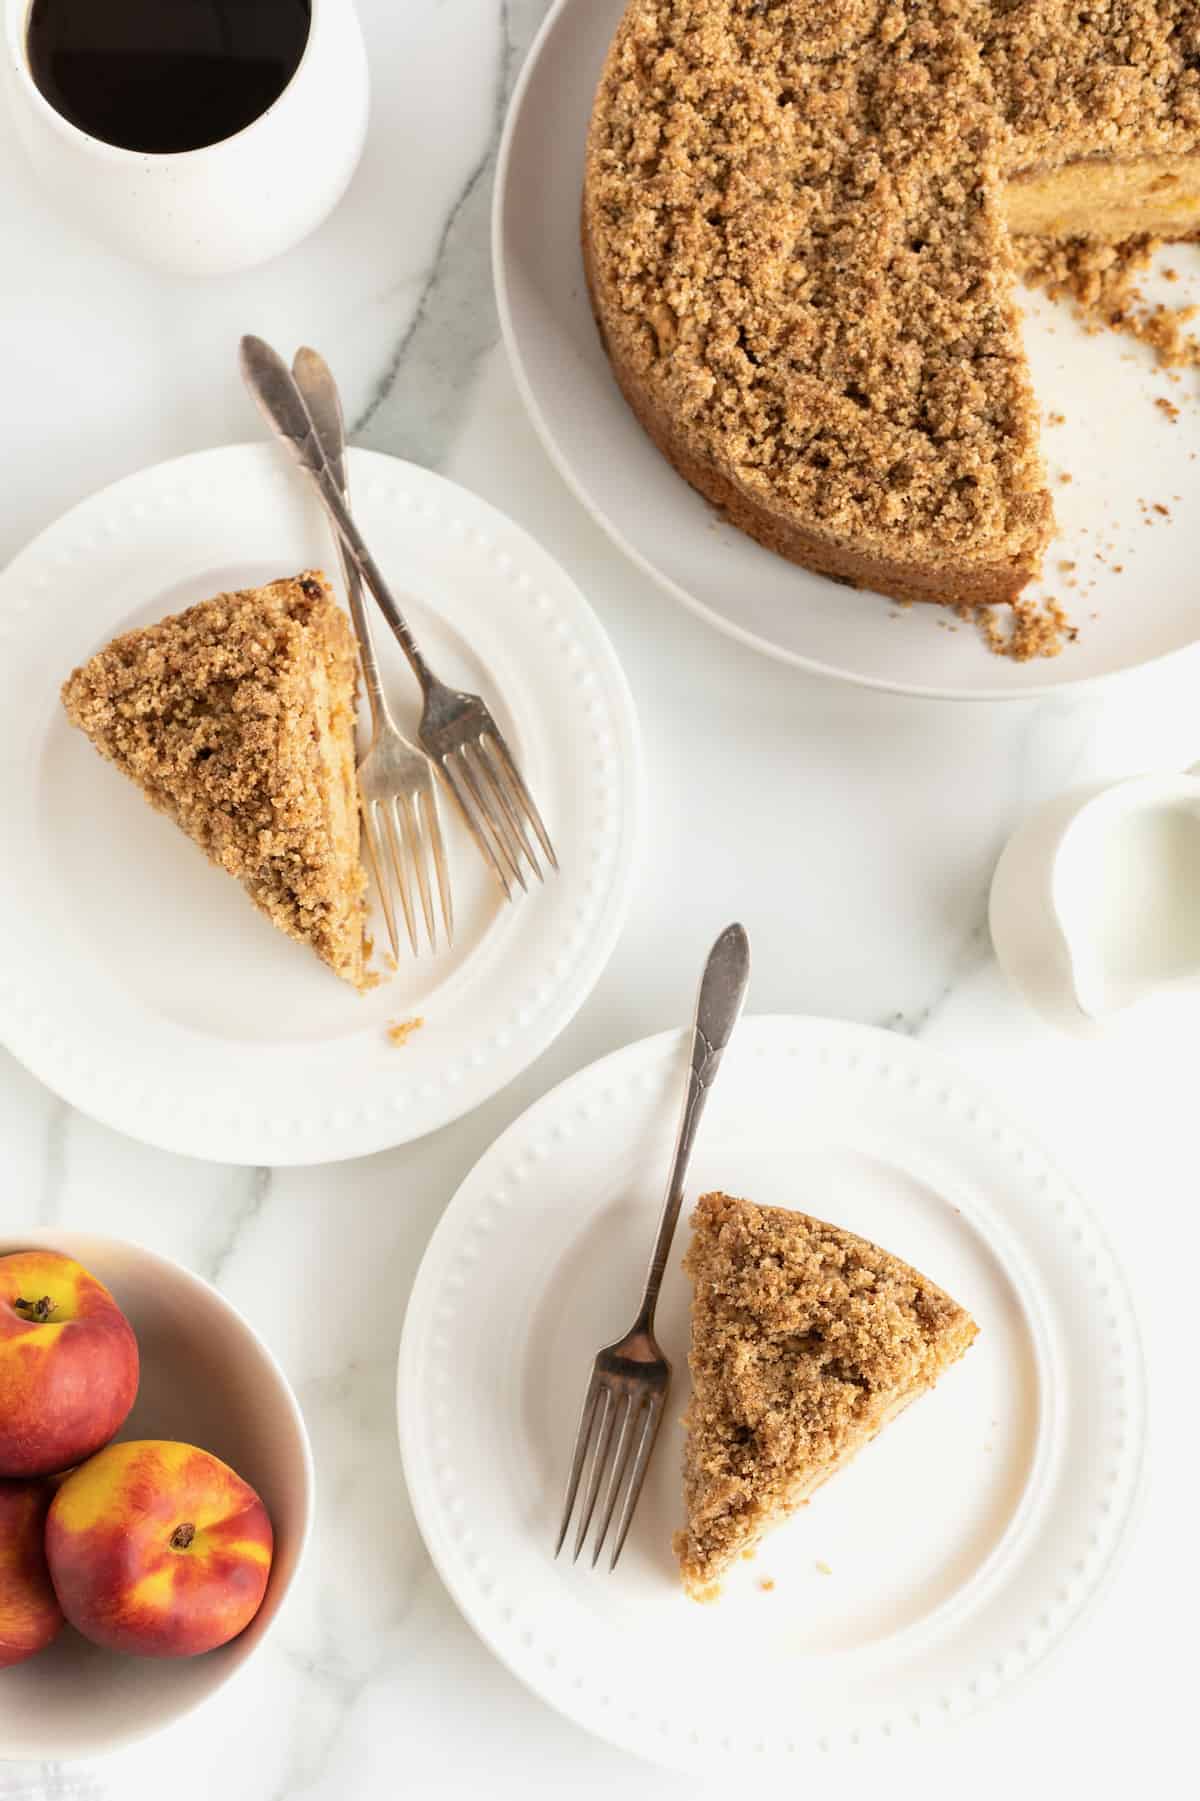 Two slices of peach coffee cake on white plates with forks and fresh peaches in the foreground.